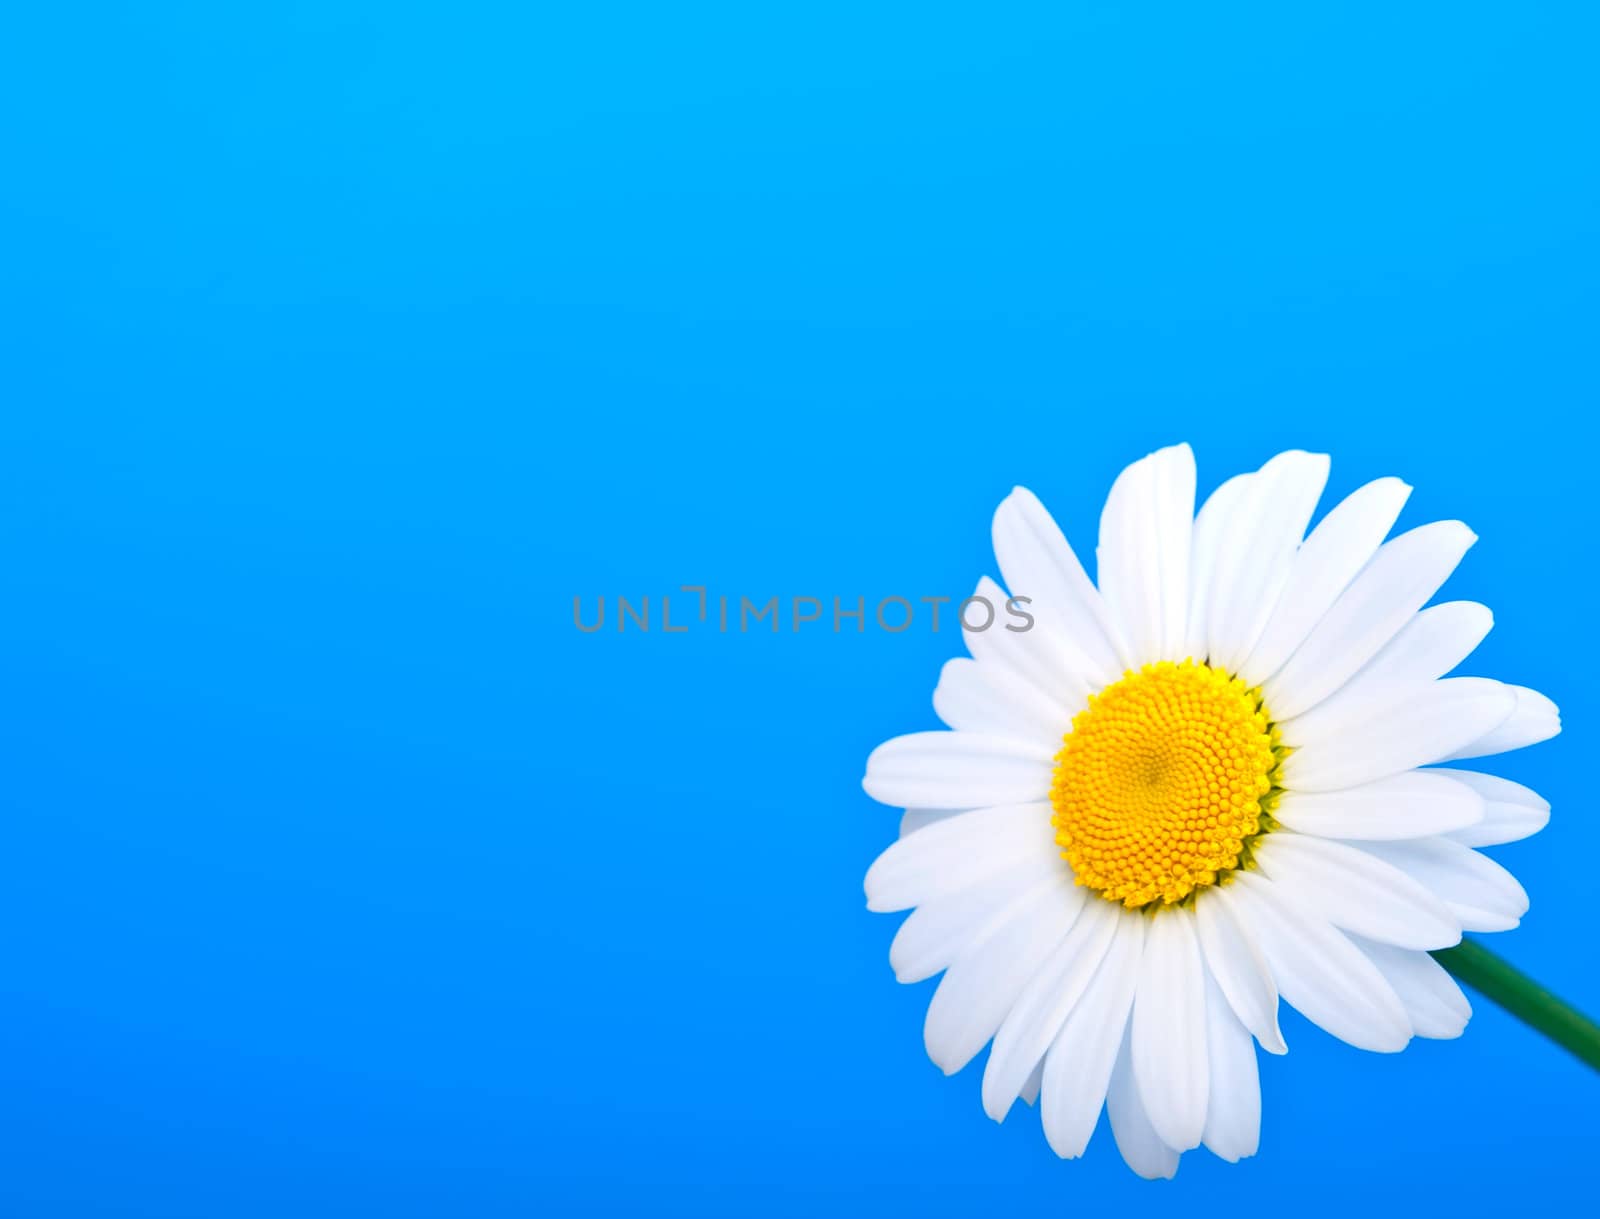 camomile on blue background 